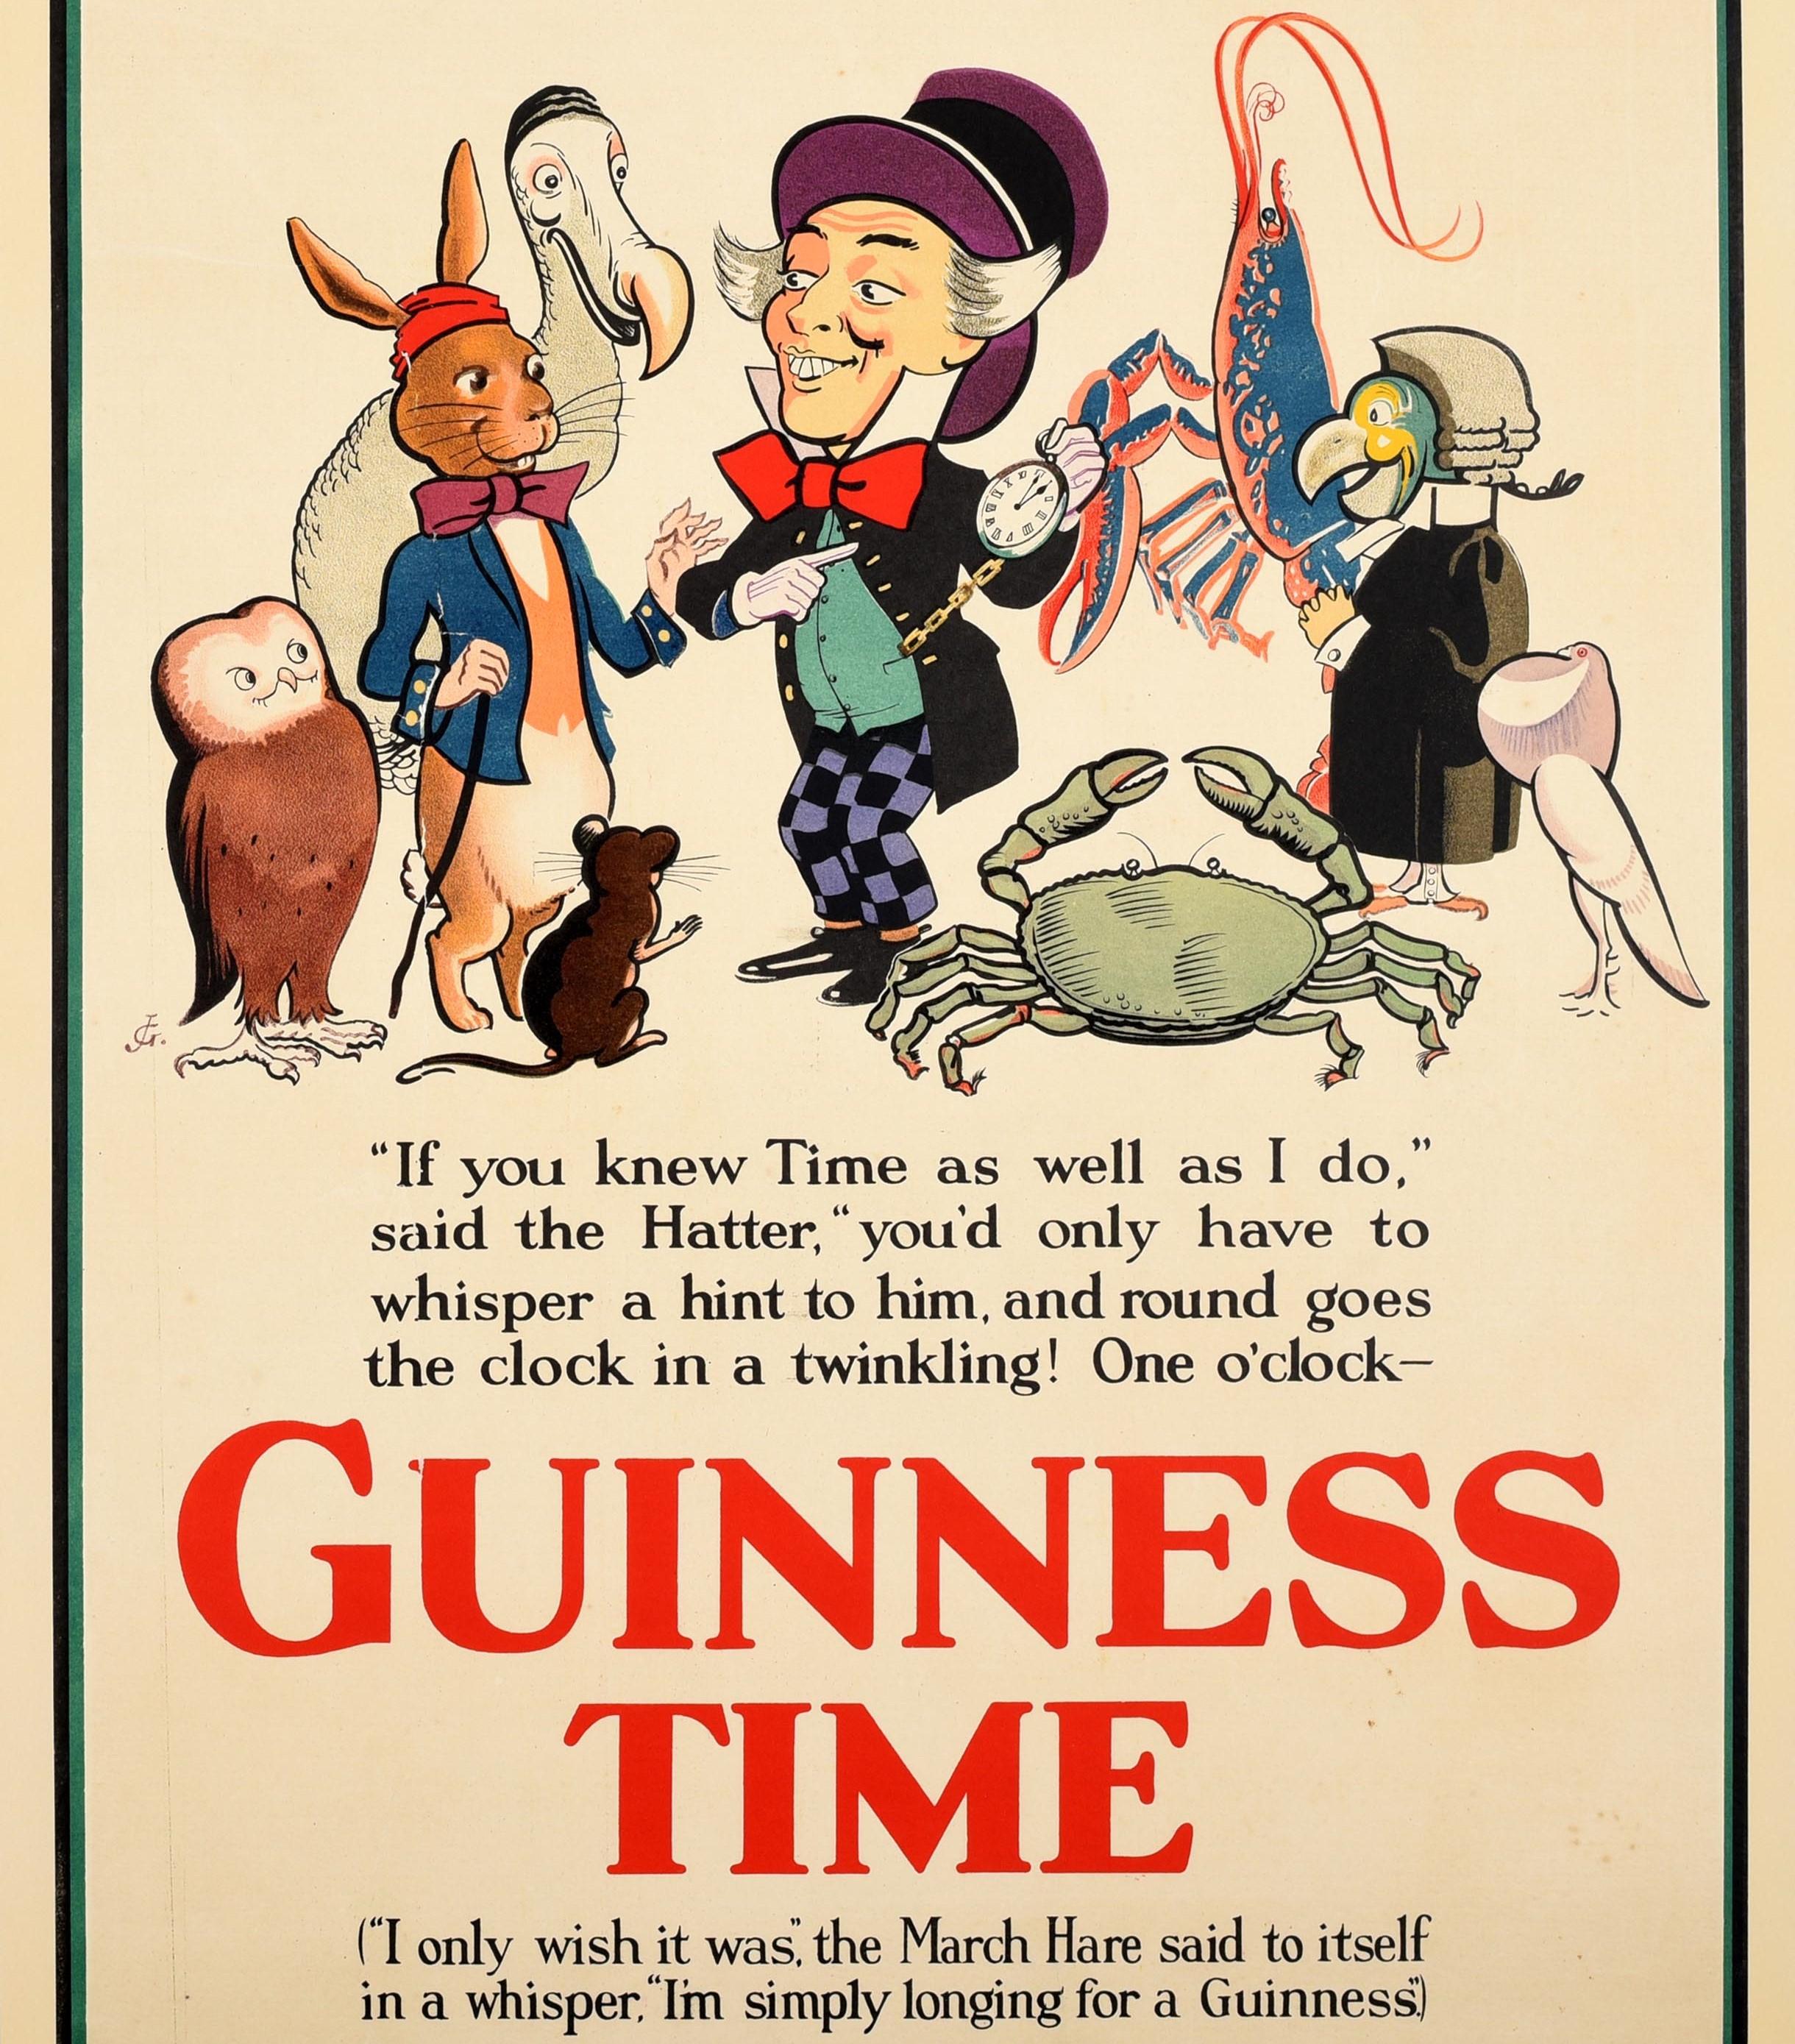 guinness time crab